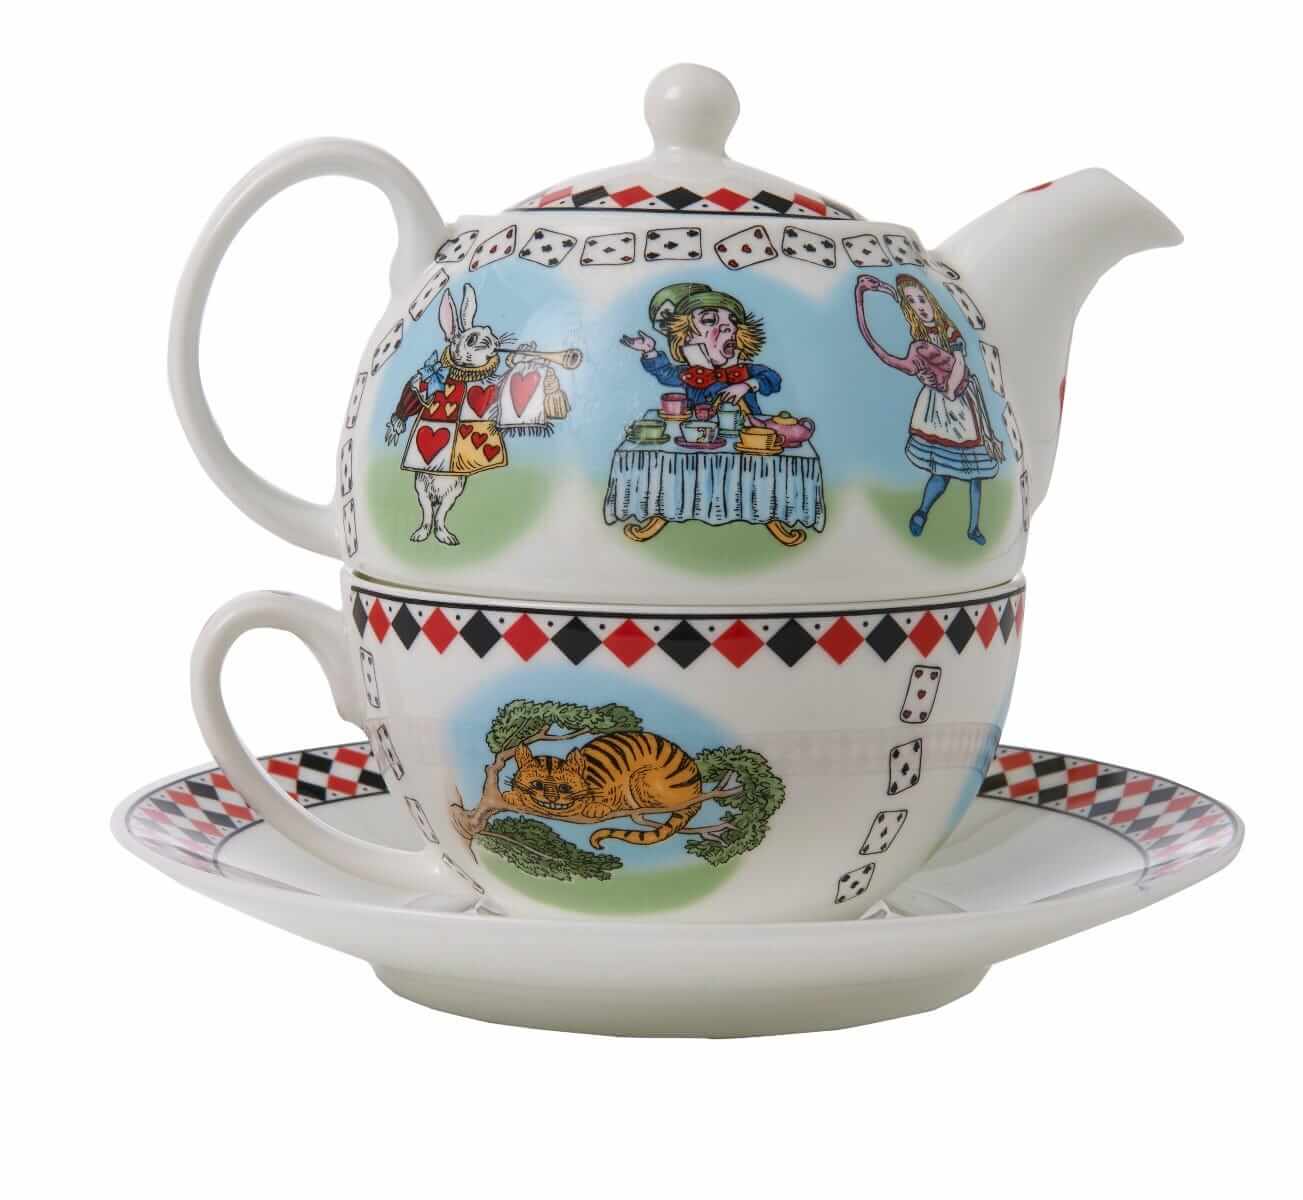 Alice In Wonderland Tea for One Teapot, Halcyon Days